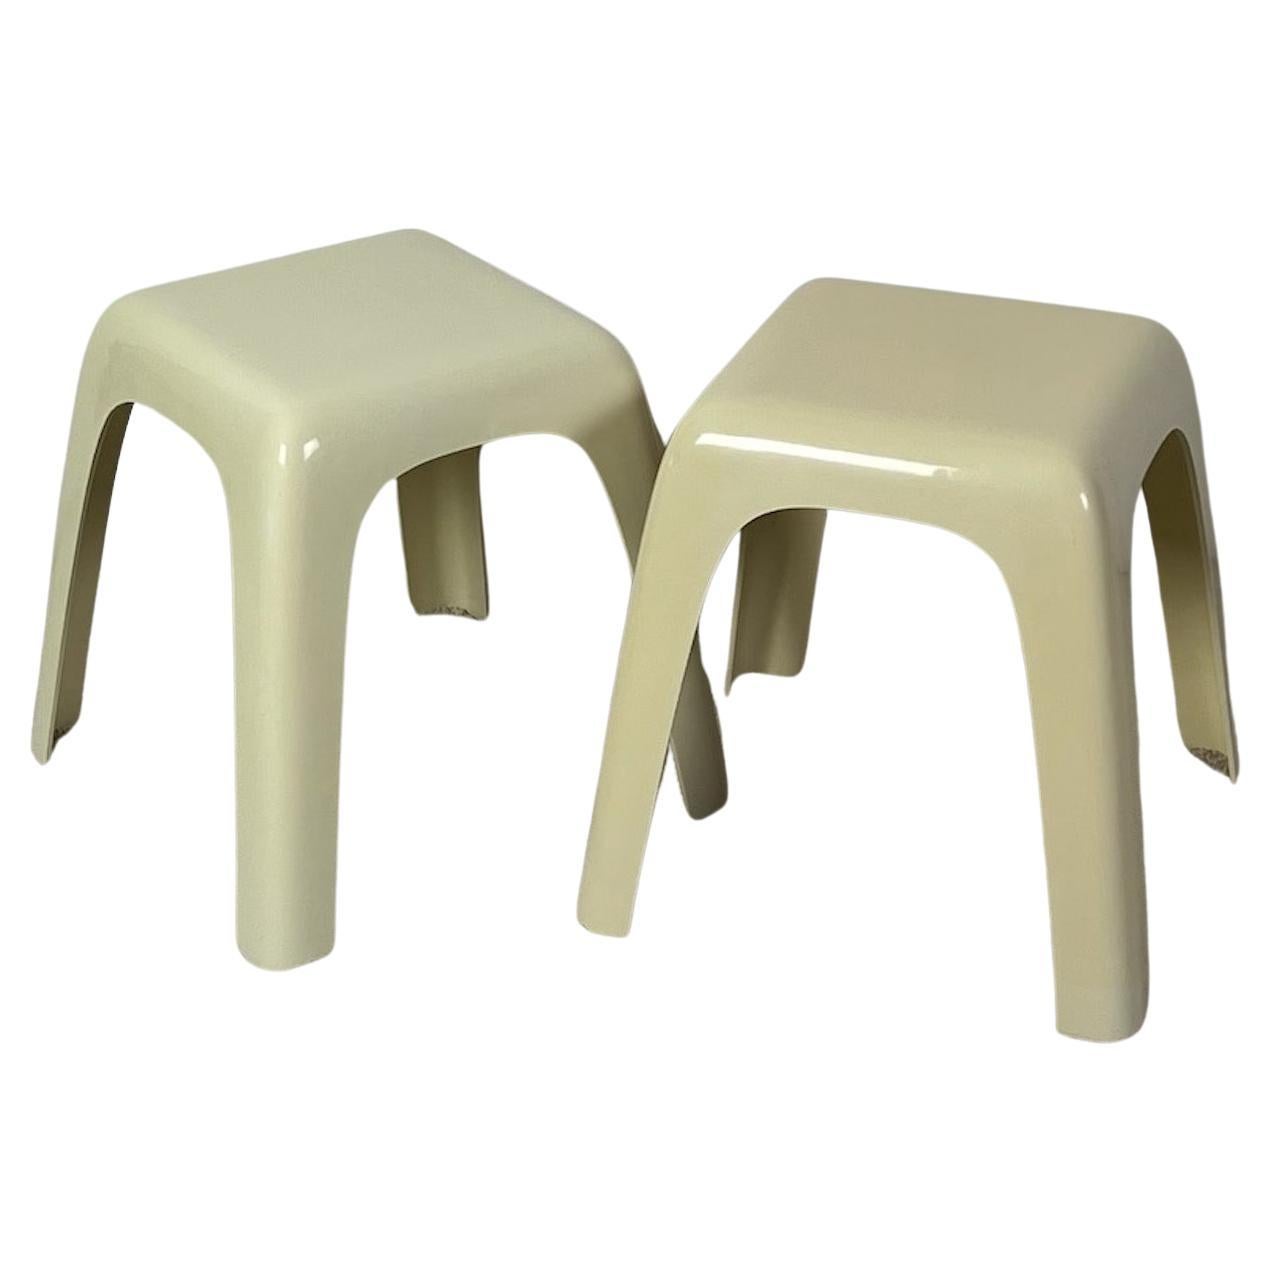 Set of tables / stools SMALL by Castiglioni Gaviraghi and Lanza for Valenti, 80s For Sale